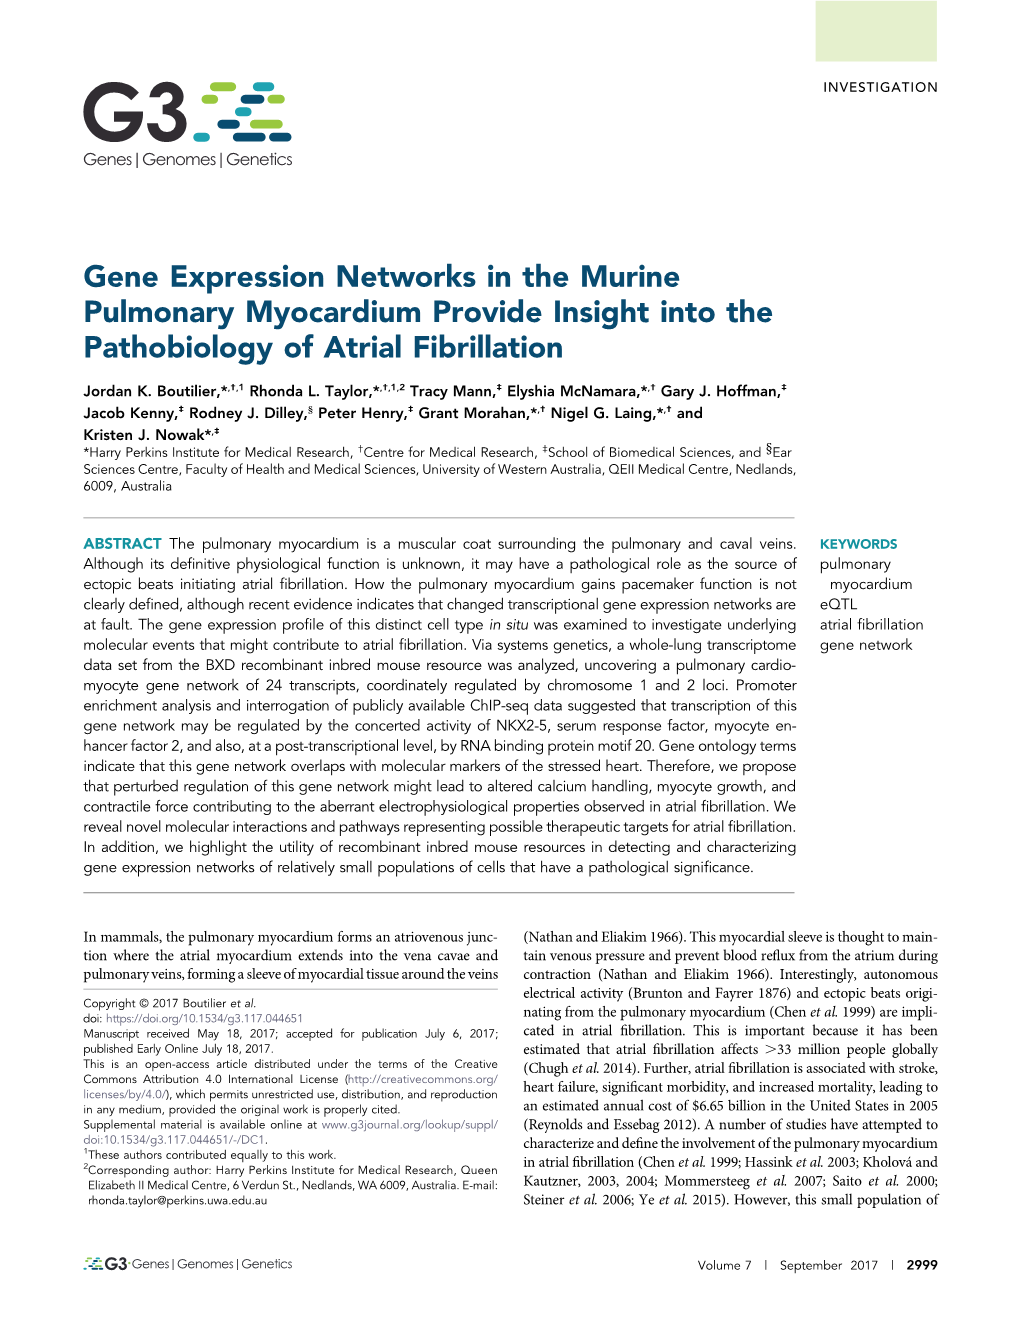 Gene Expression Networks in the Murine Pulmonary Myocardium Provide Insight Into the Pathobiology of Atrial Fibrillation